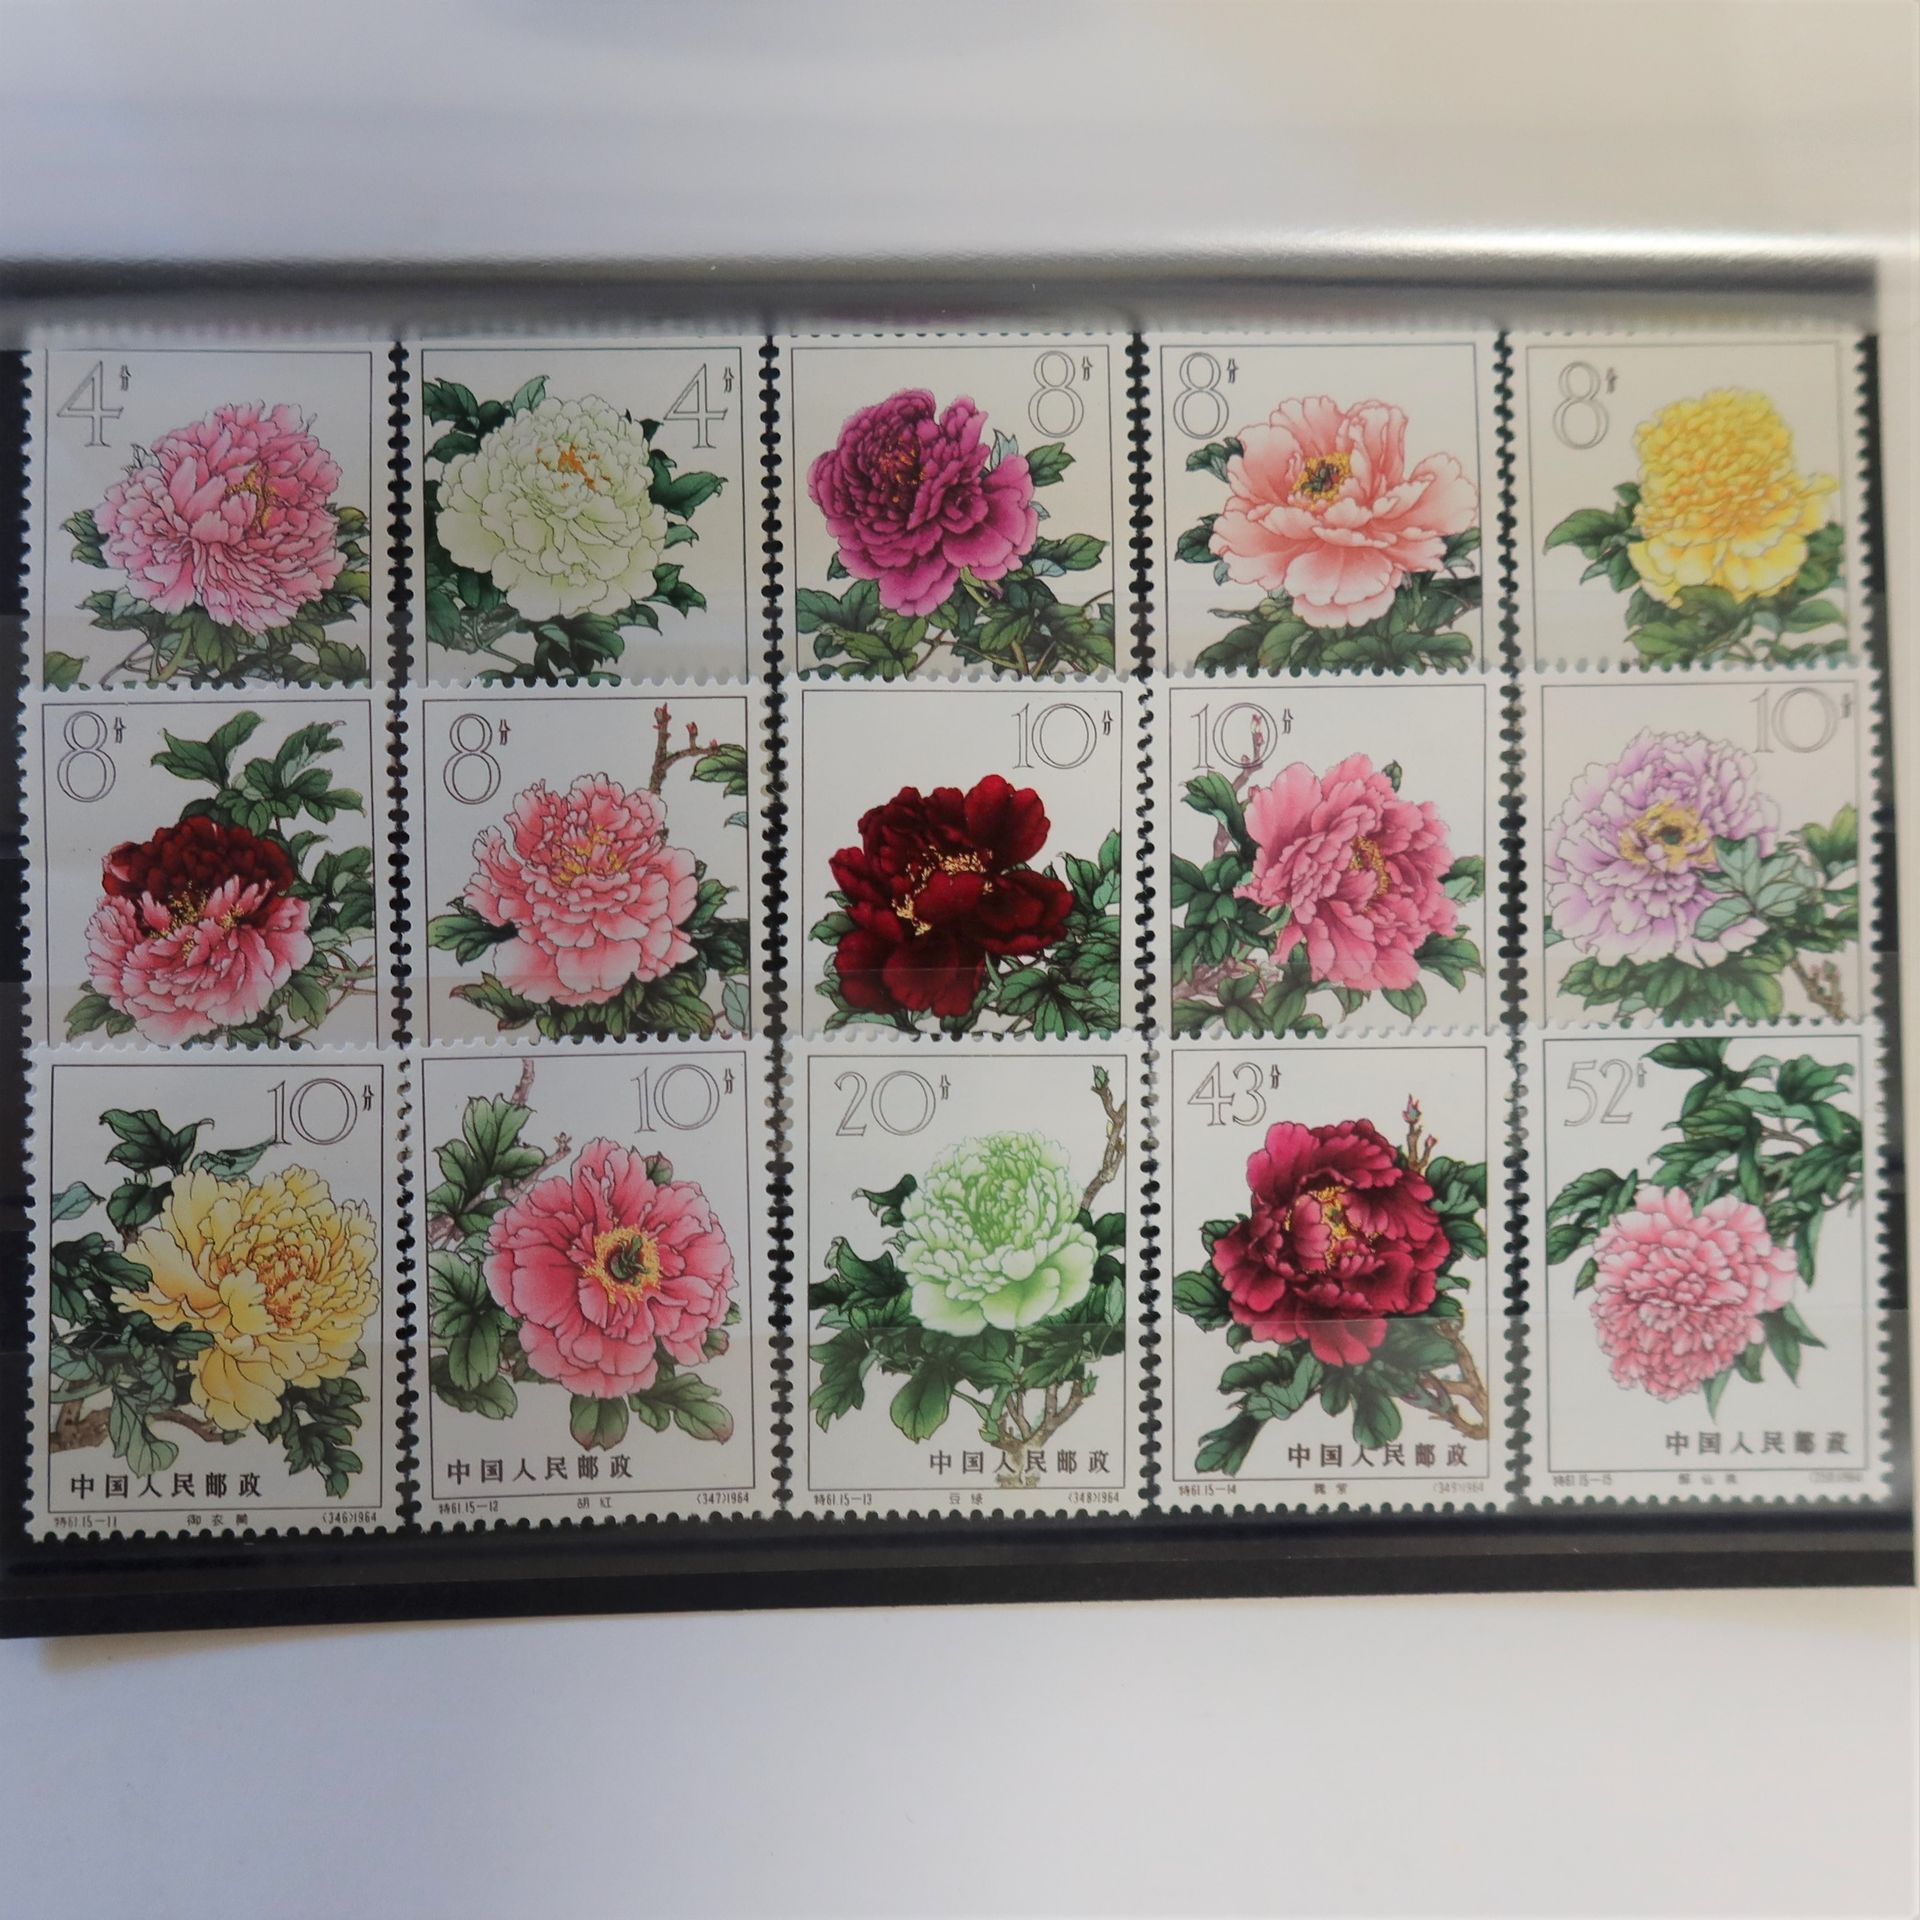 Null [CHINA]
Superb complete set of 15 values n°1552 to 1566 "peonies", new, lux&hellip;